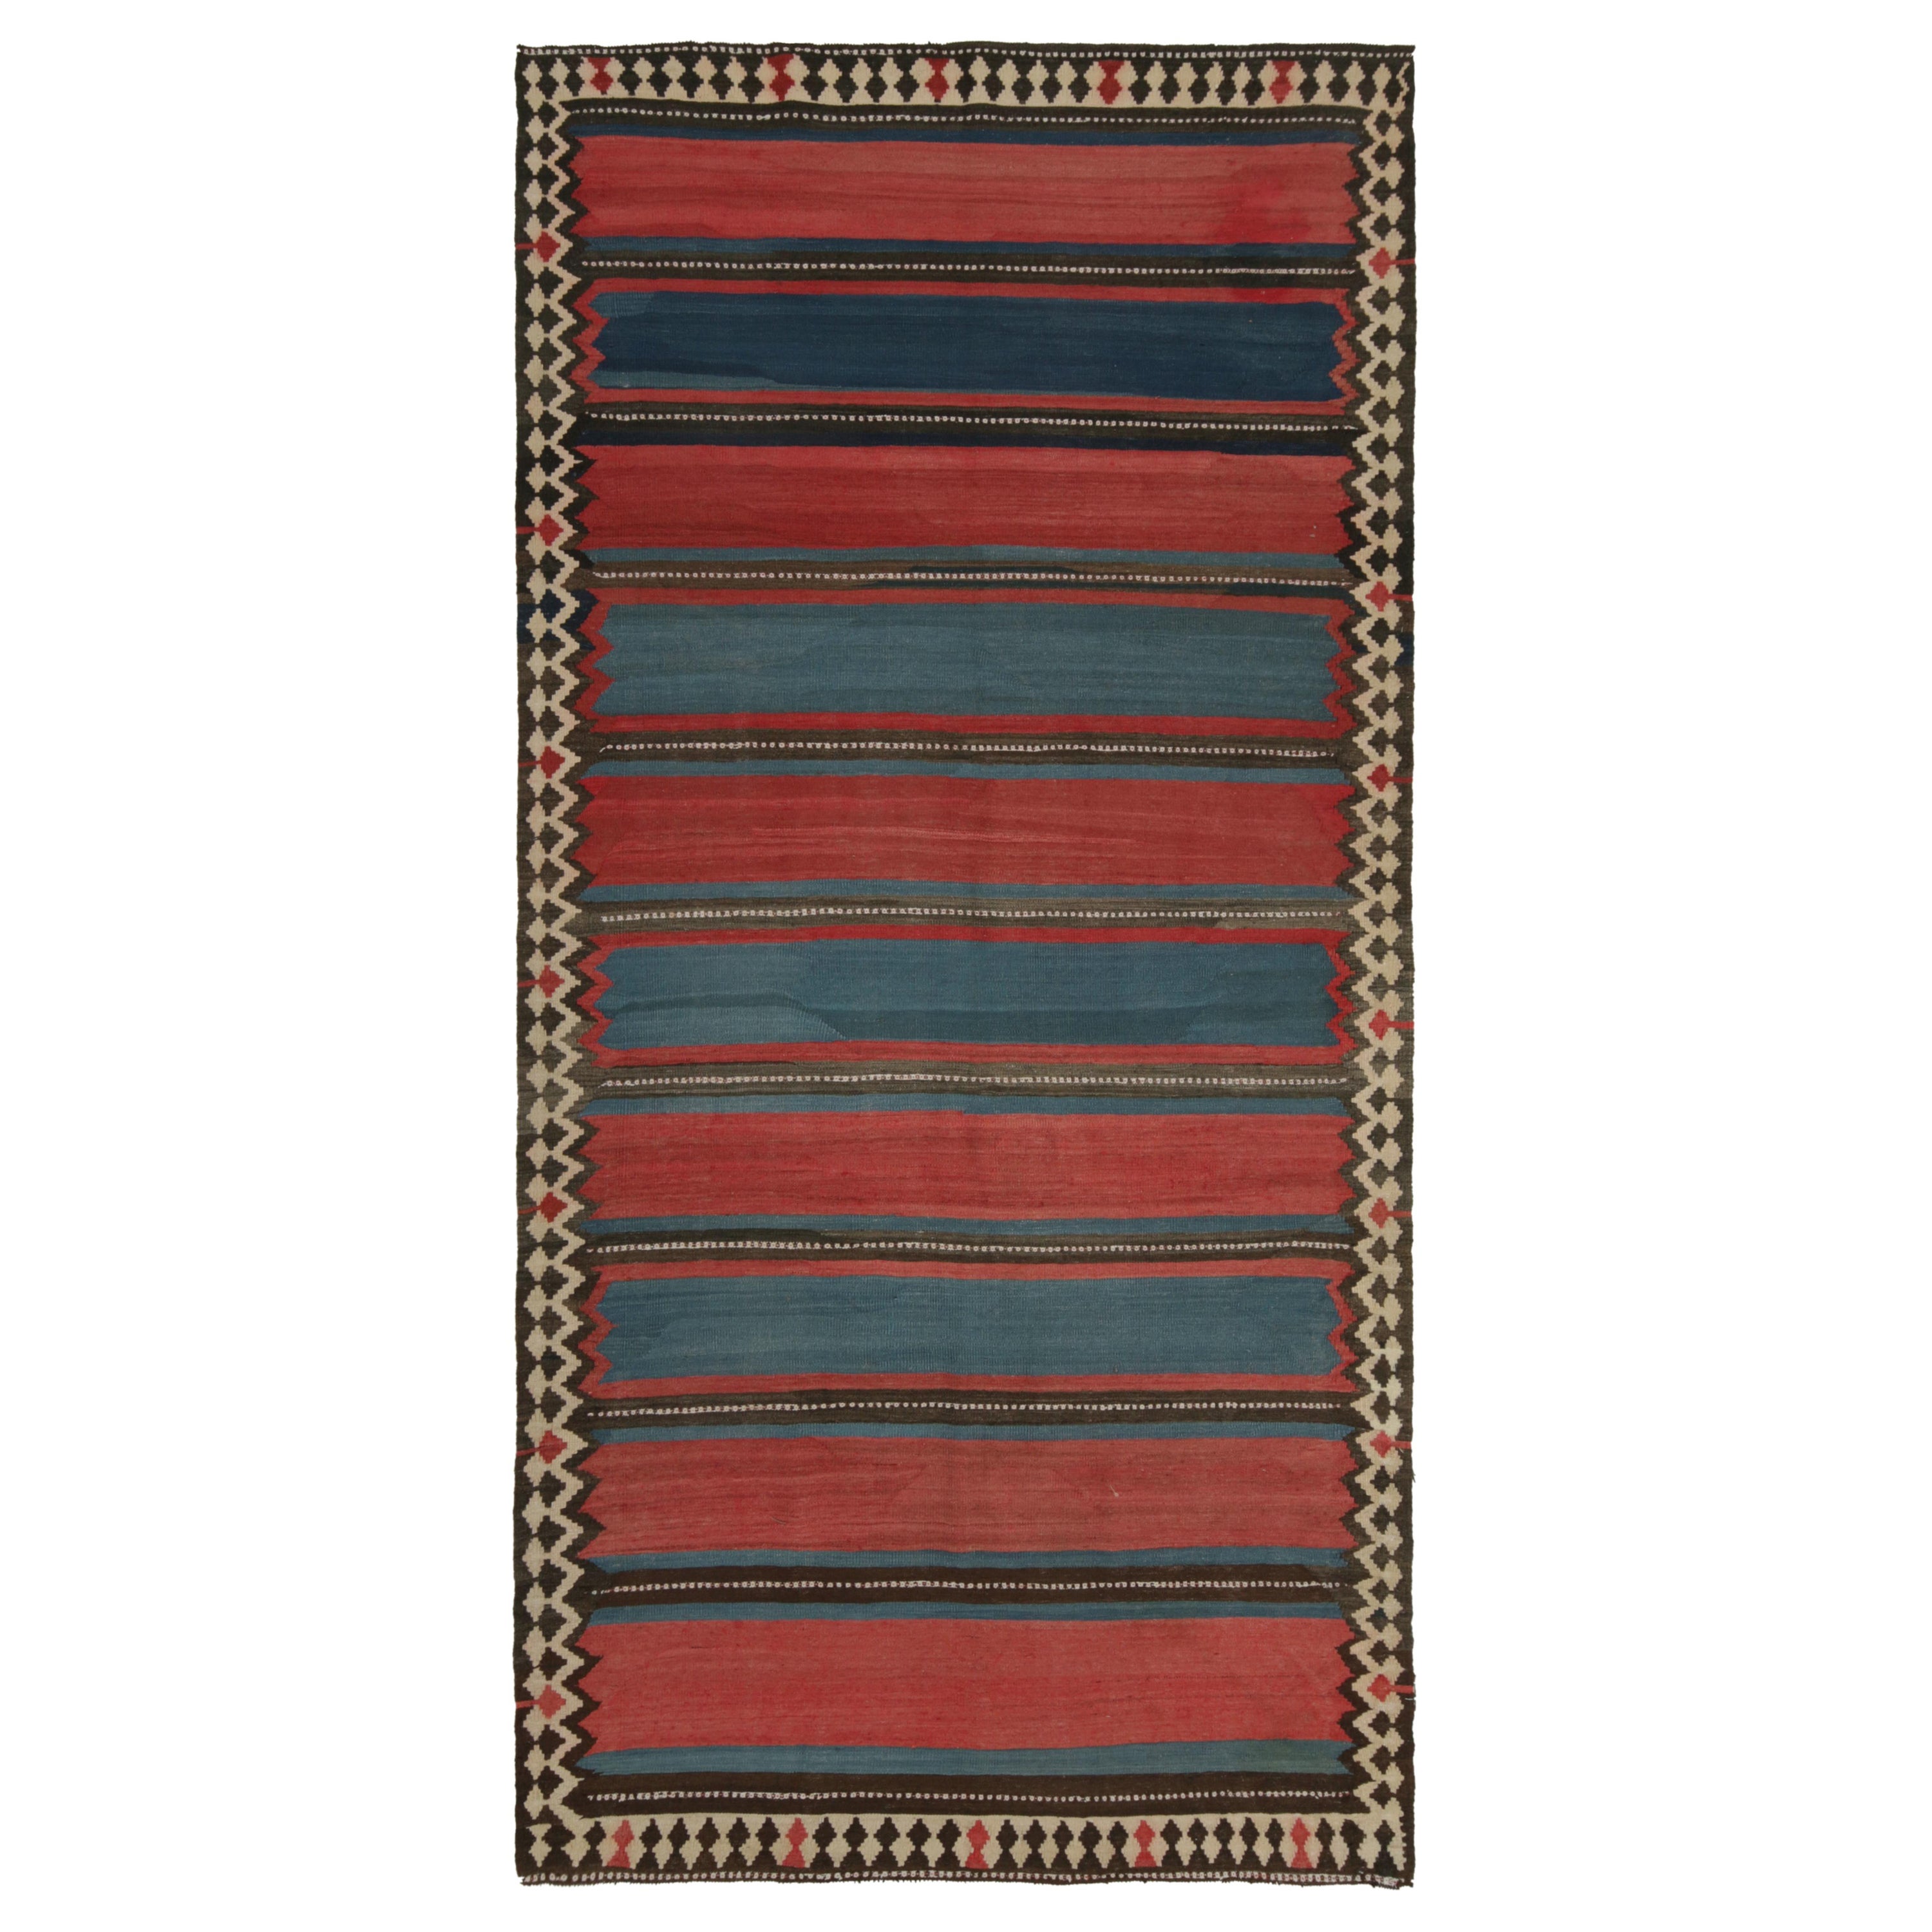 Vintage Shahsavan Persian Kilim in Red and Blue Stripes, by Rug & Kilim For Sale